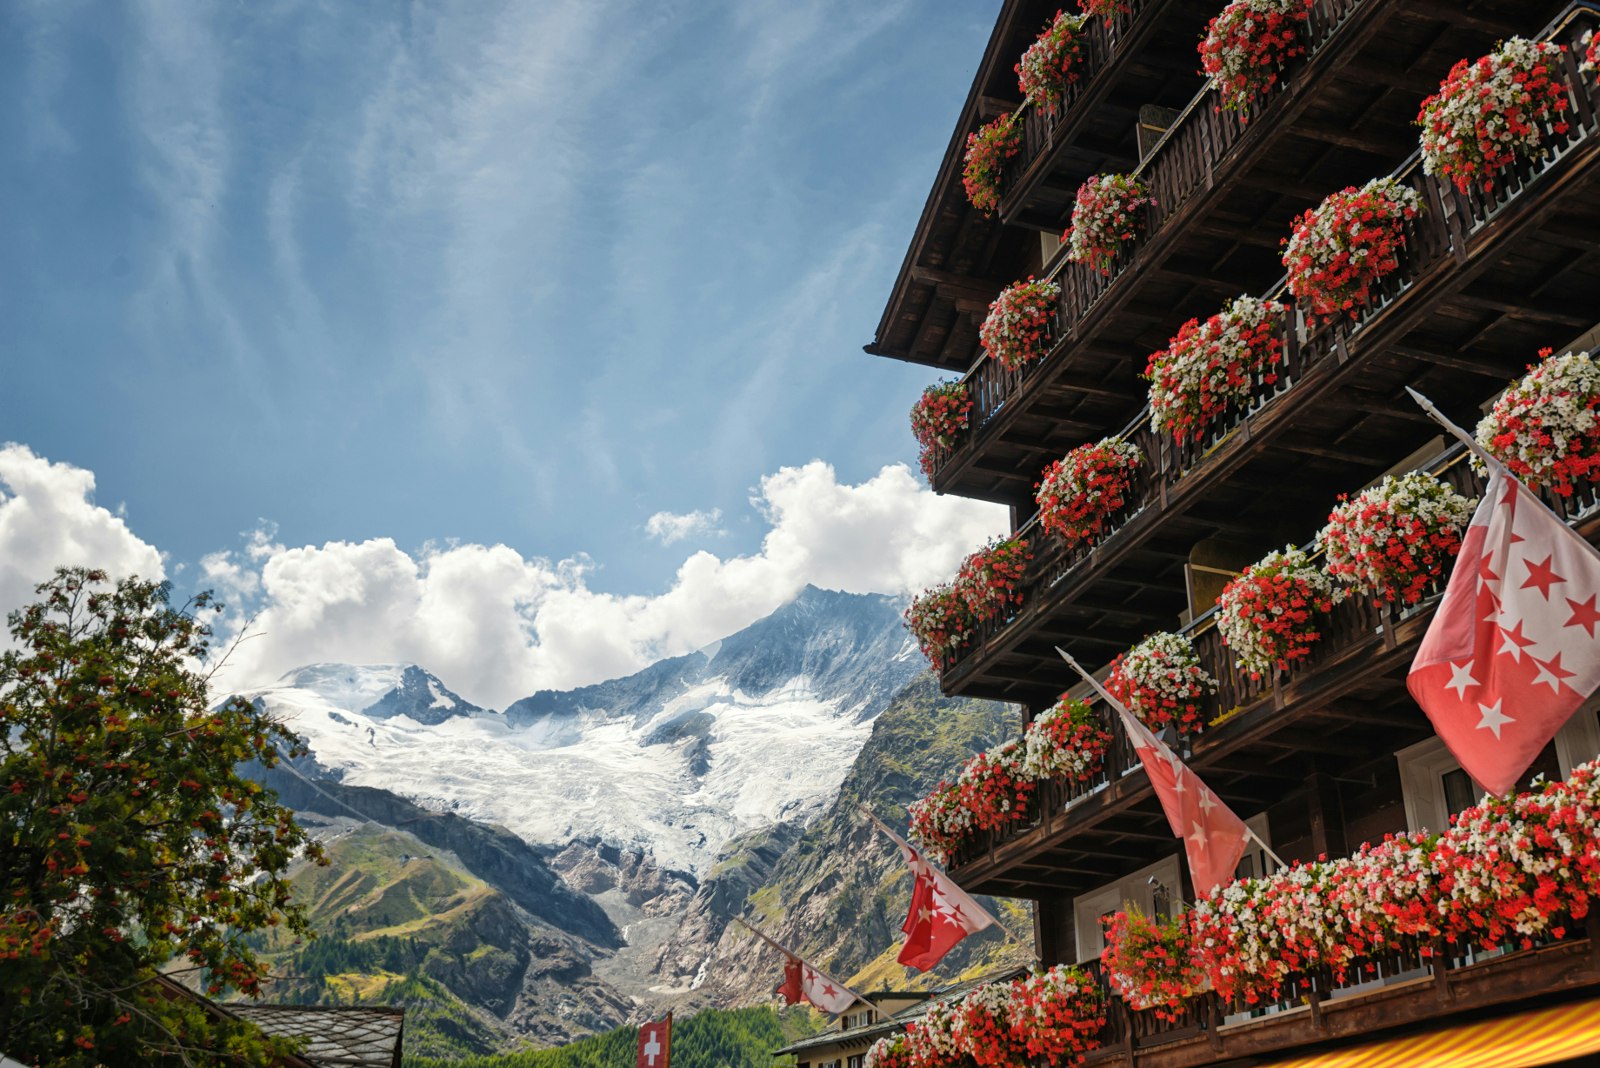 A flower-covered chalet at Saas Fee, with glacier-covered slopes above